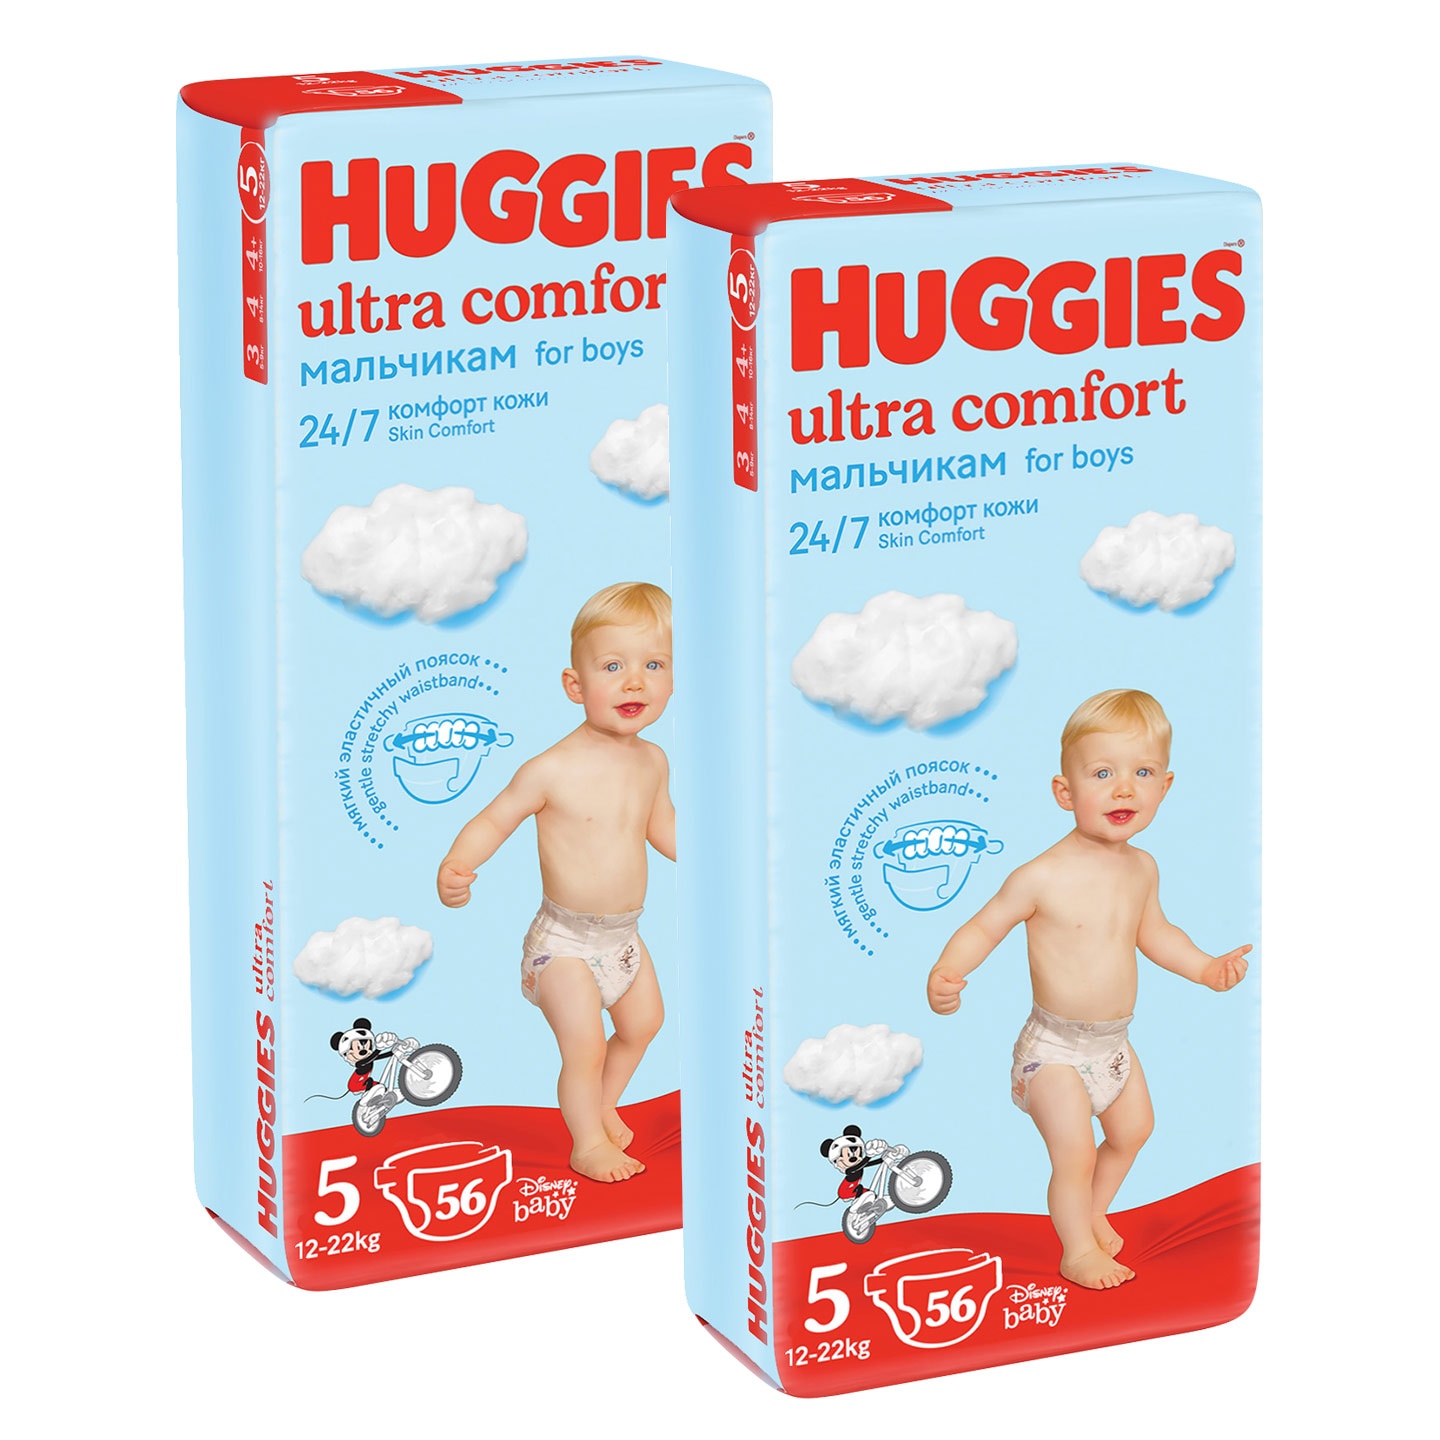 Disposable Diapers HUGGIES Ultra Comfort 12-22 kg, size 5, girl, 64 Nappies  Diapers for children Baby Diapers Haggis Hagis sbddv - Price history &  Review, AliExpress Seller - Tmall — Детям